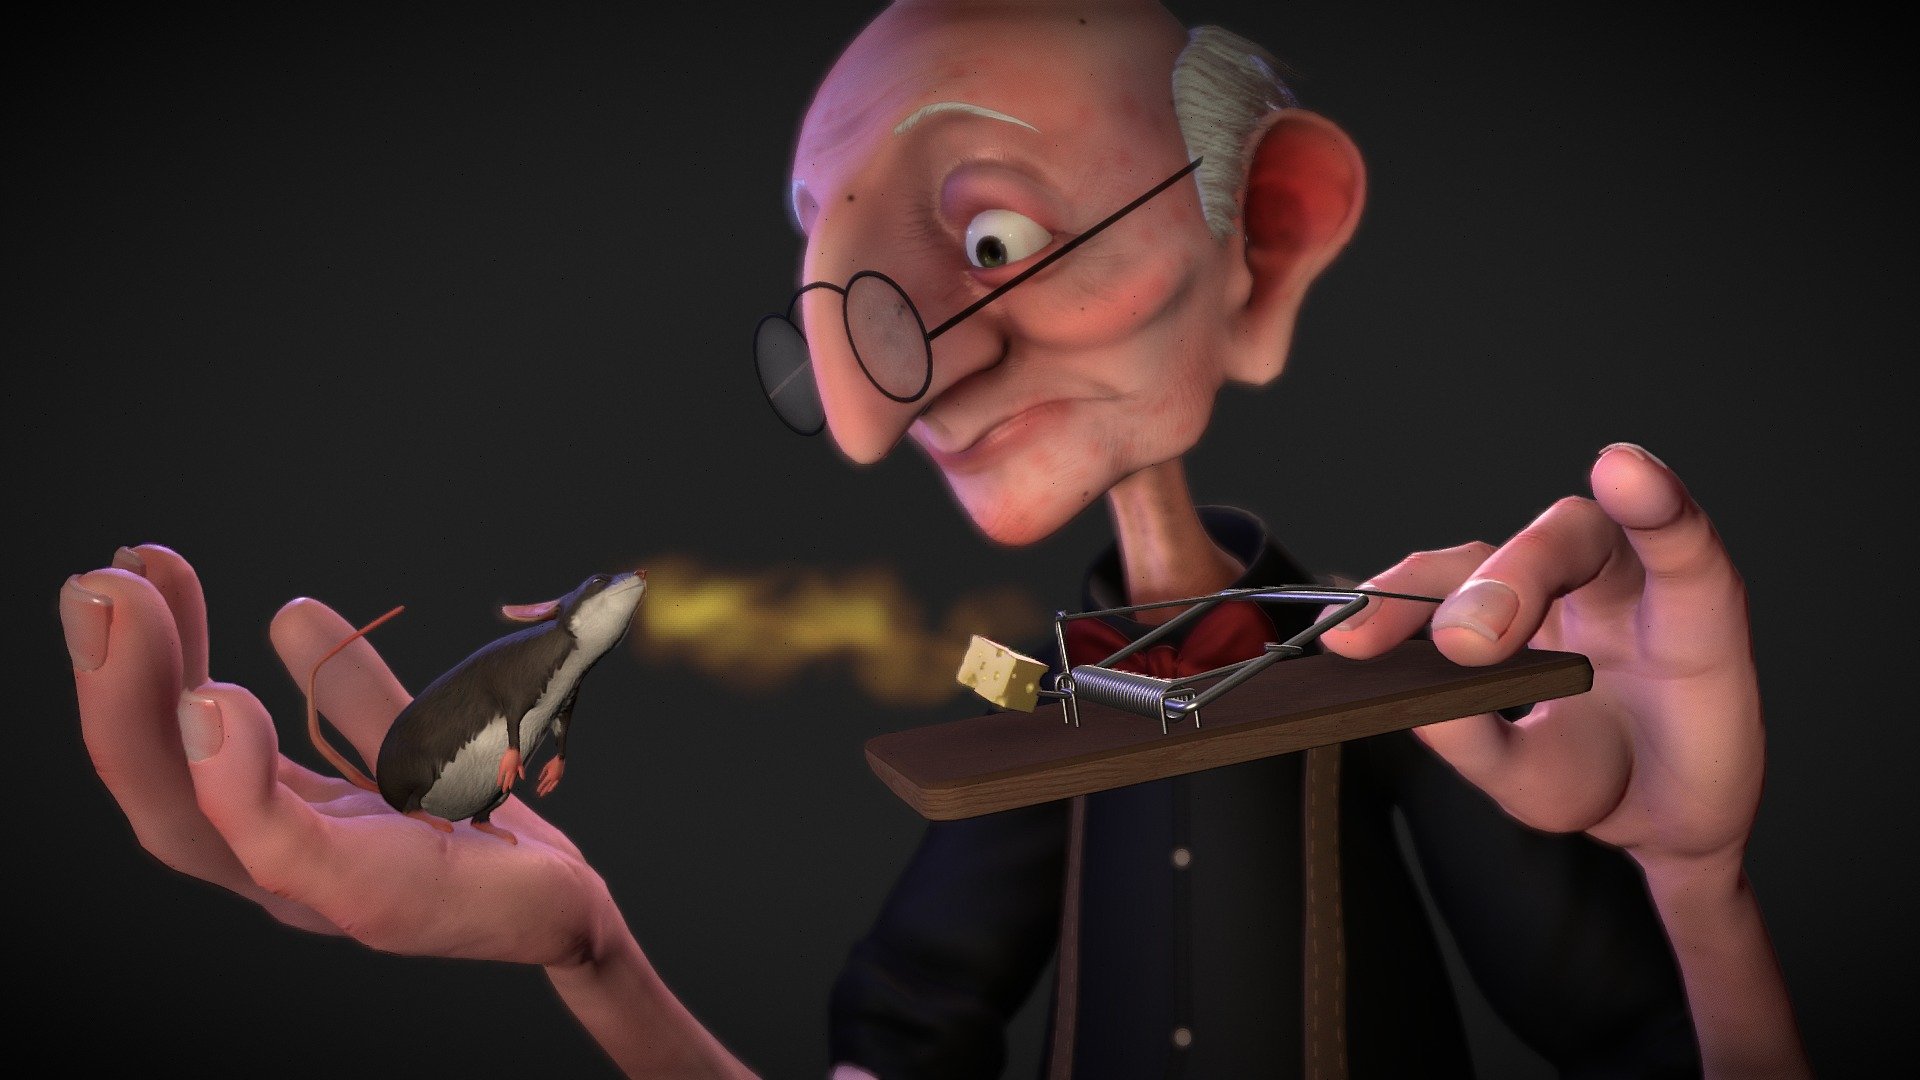 &ldquo;Old man with Mouse trap